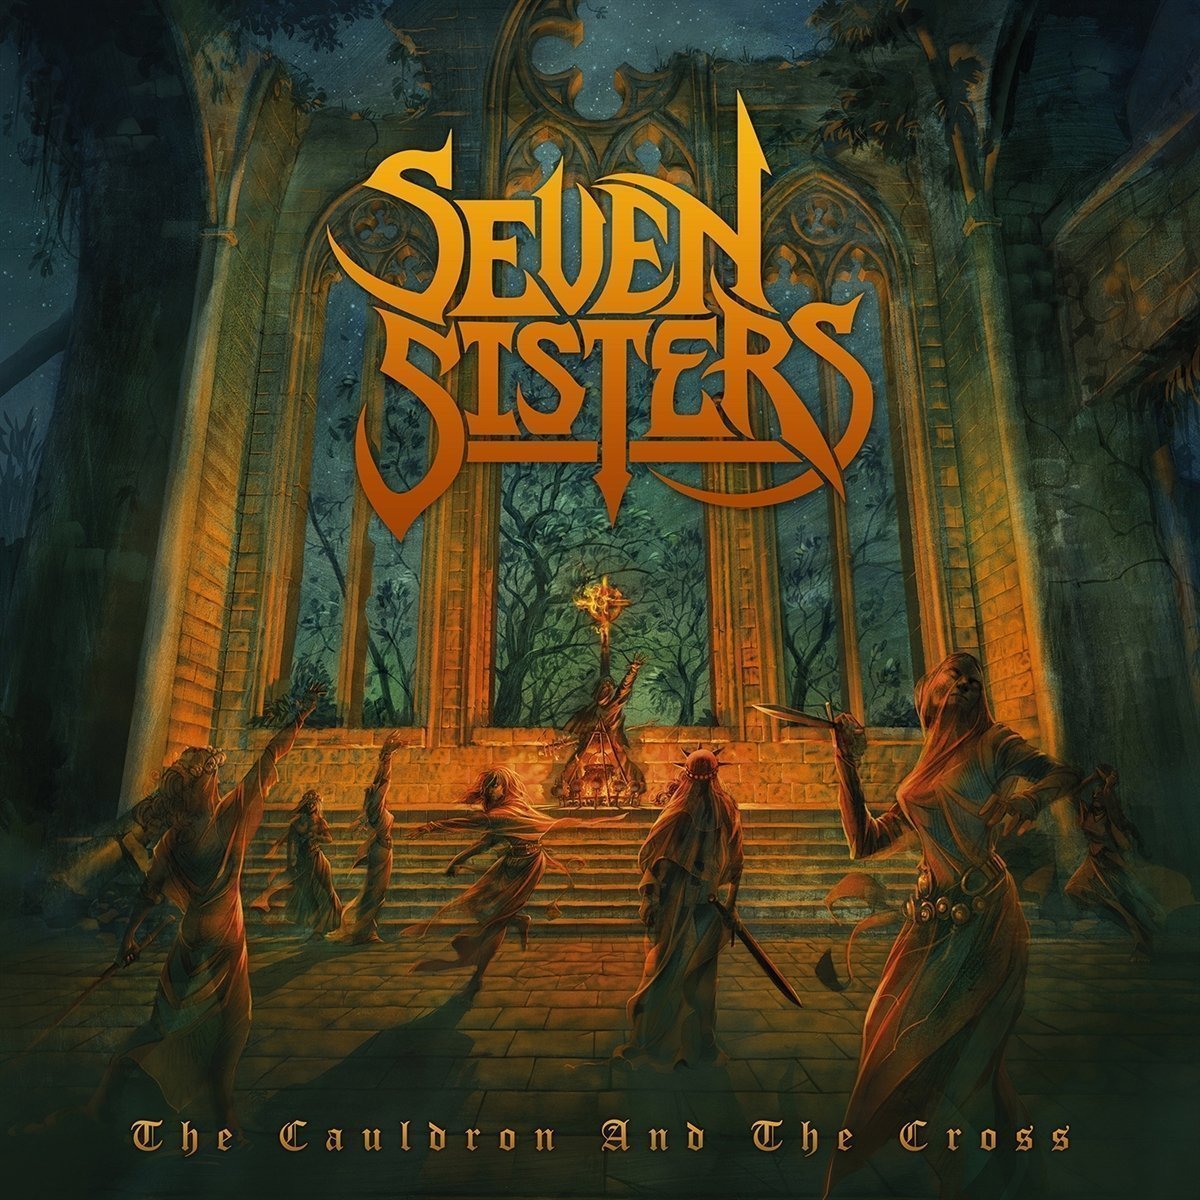 LP Seven Sisters - The Cauldron And The Cross (2 LP)